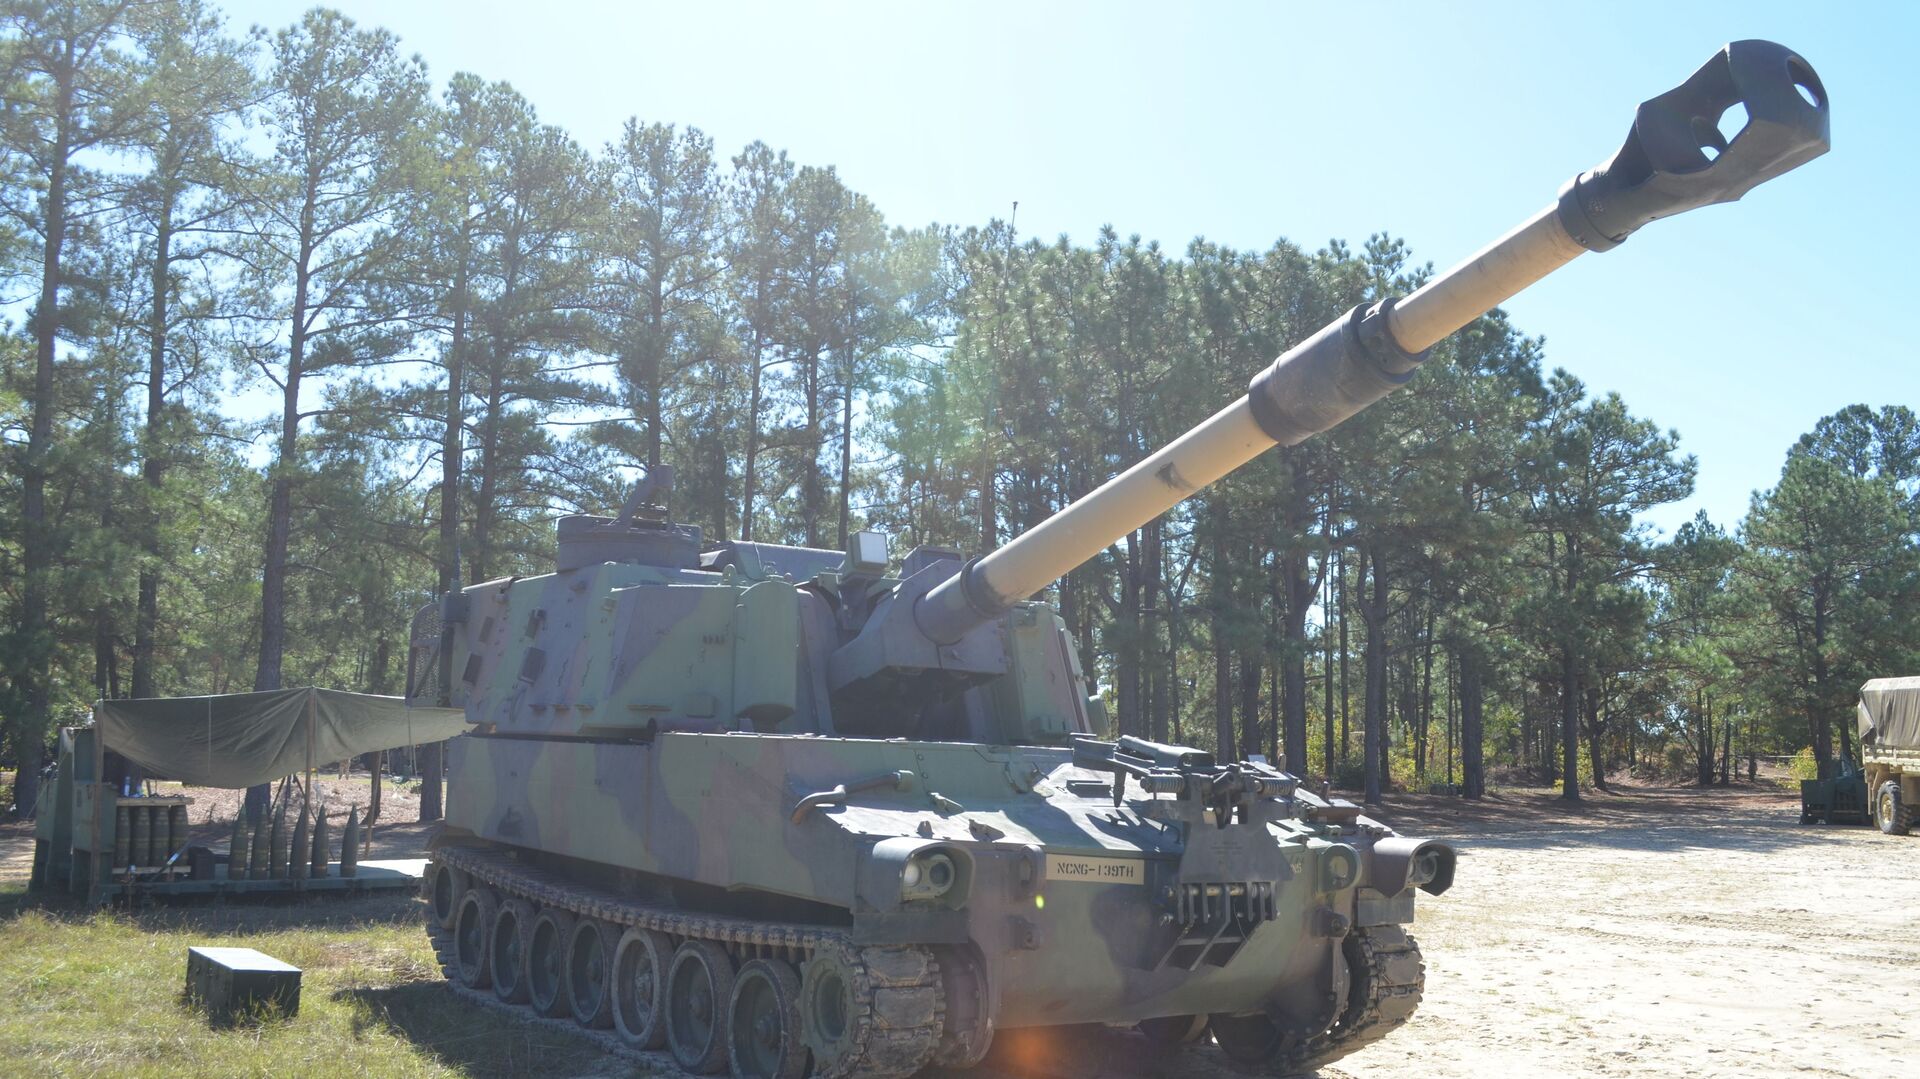 The M109 Paladin Self-Propelled Howitzer standing ready deep in the southern training areas at Fort Bragg. Nine National Guard troops from North and South Carolina, Florida, Georgia, Mississippi, Illinois and New Jersey are attending the 13 Bravo artillery military occupational specialty (MOS) reclassification course and will learn how to be a crew member on the three main “cannon” artillery weapons systems in the U.S. Army: The M119A3 105mm light towed howitzer, M777A2 155mm medium towed howitzer and the M109A6 Paladin 155mm self-propelled howitzer. Over the course of two days in the field, students will fire hundreds of rounds from all three weapons. - Sputnik International, 1920, 18.01.2023